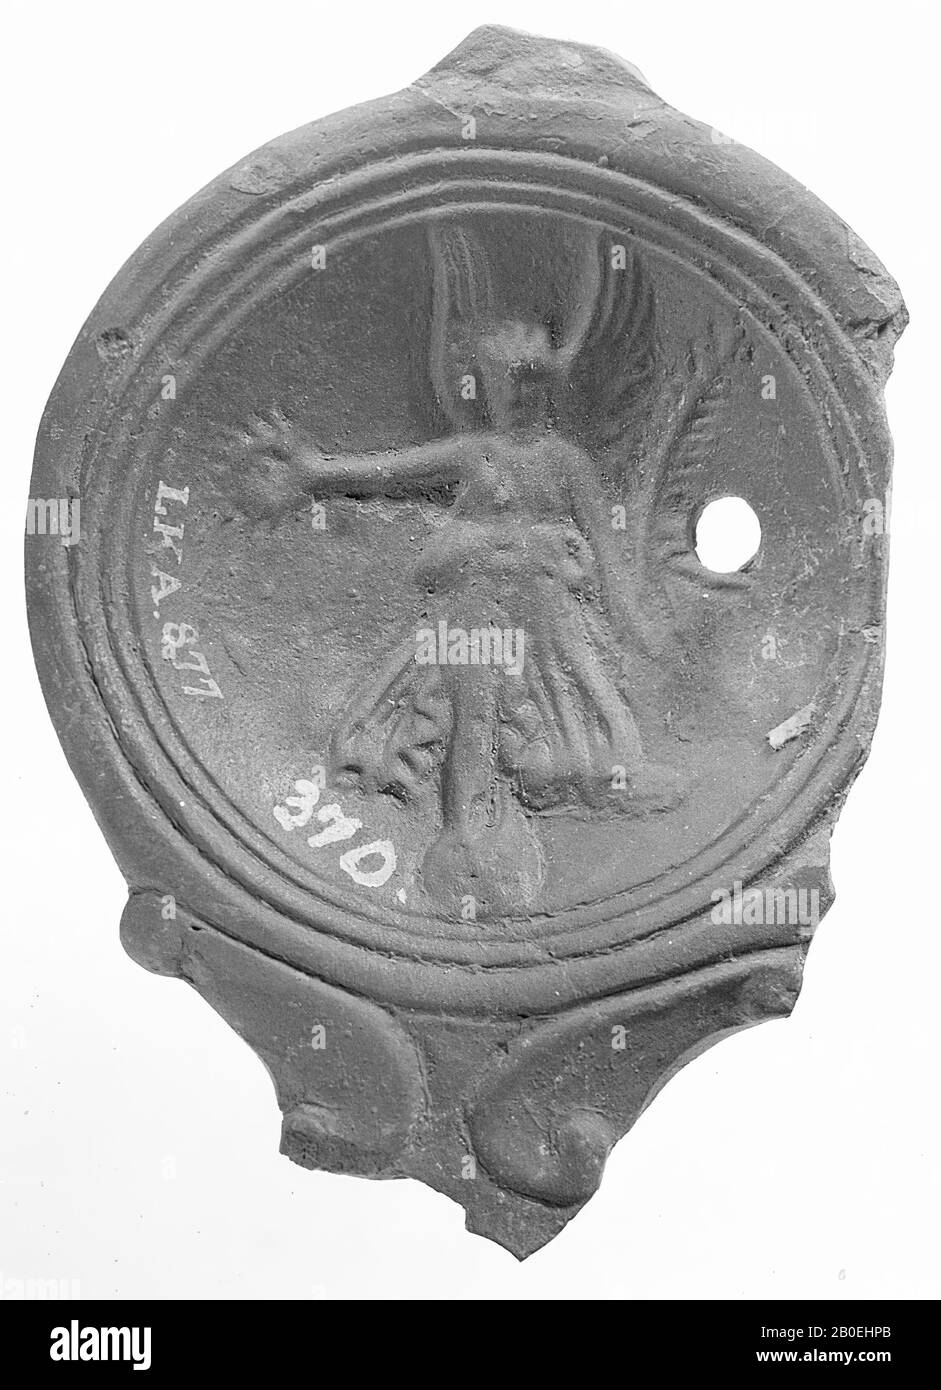 Fragment of a black-nested oil lamp. The hollow mirror is surrounded with concentric circles and decorated with a standing Victoria on a sphere with a wreath and a palm branch. The broad, short spout was decorated with volutes. The small filling hole is to the right of the figure., Oil lamp, earthenware, terracotta, 4 x 9.5 x 7.2 cm, 1st and 2nd century AD. 1-200, Turkey Stock Photo